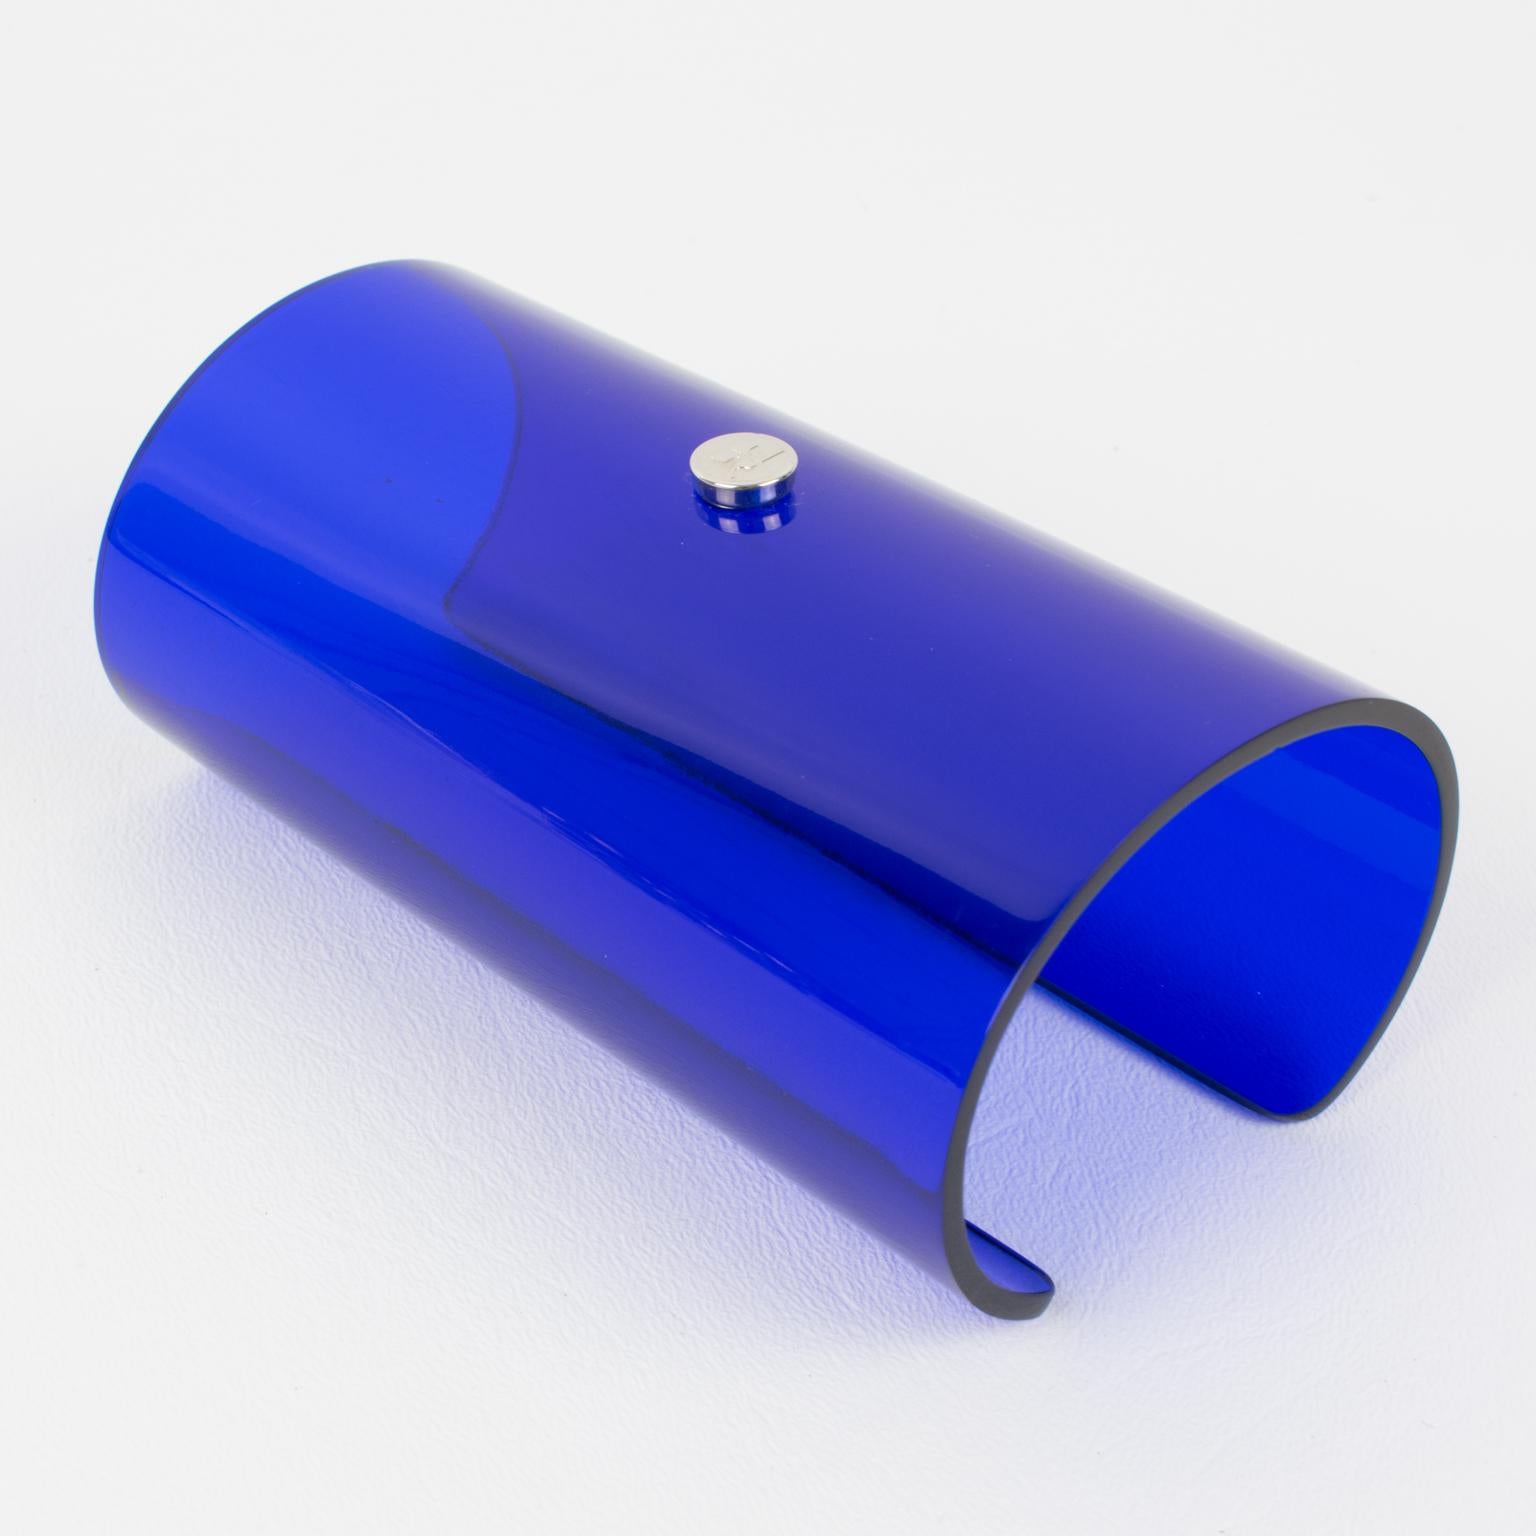 This stunning Courreges Paris massive bangle bracelet features an oversized cuff design in transparent cobalt blue resin or Lucite. The piece has a spectacular cone shape and is signed on the front with chrome metal AC Courrege's iconic brand